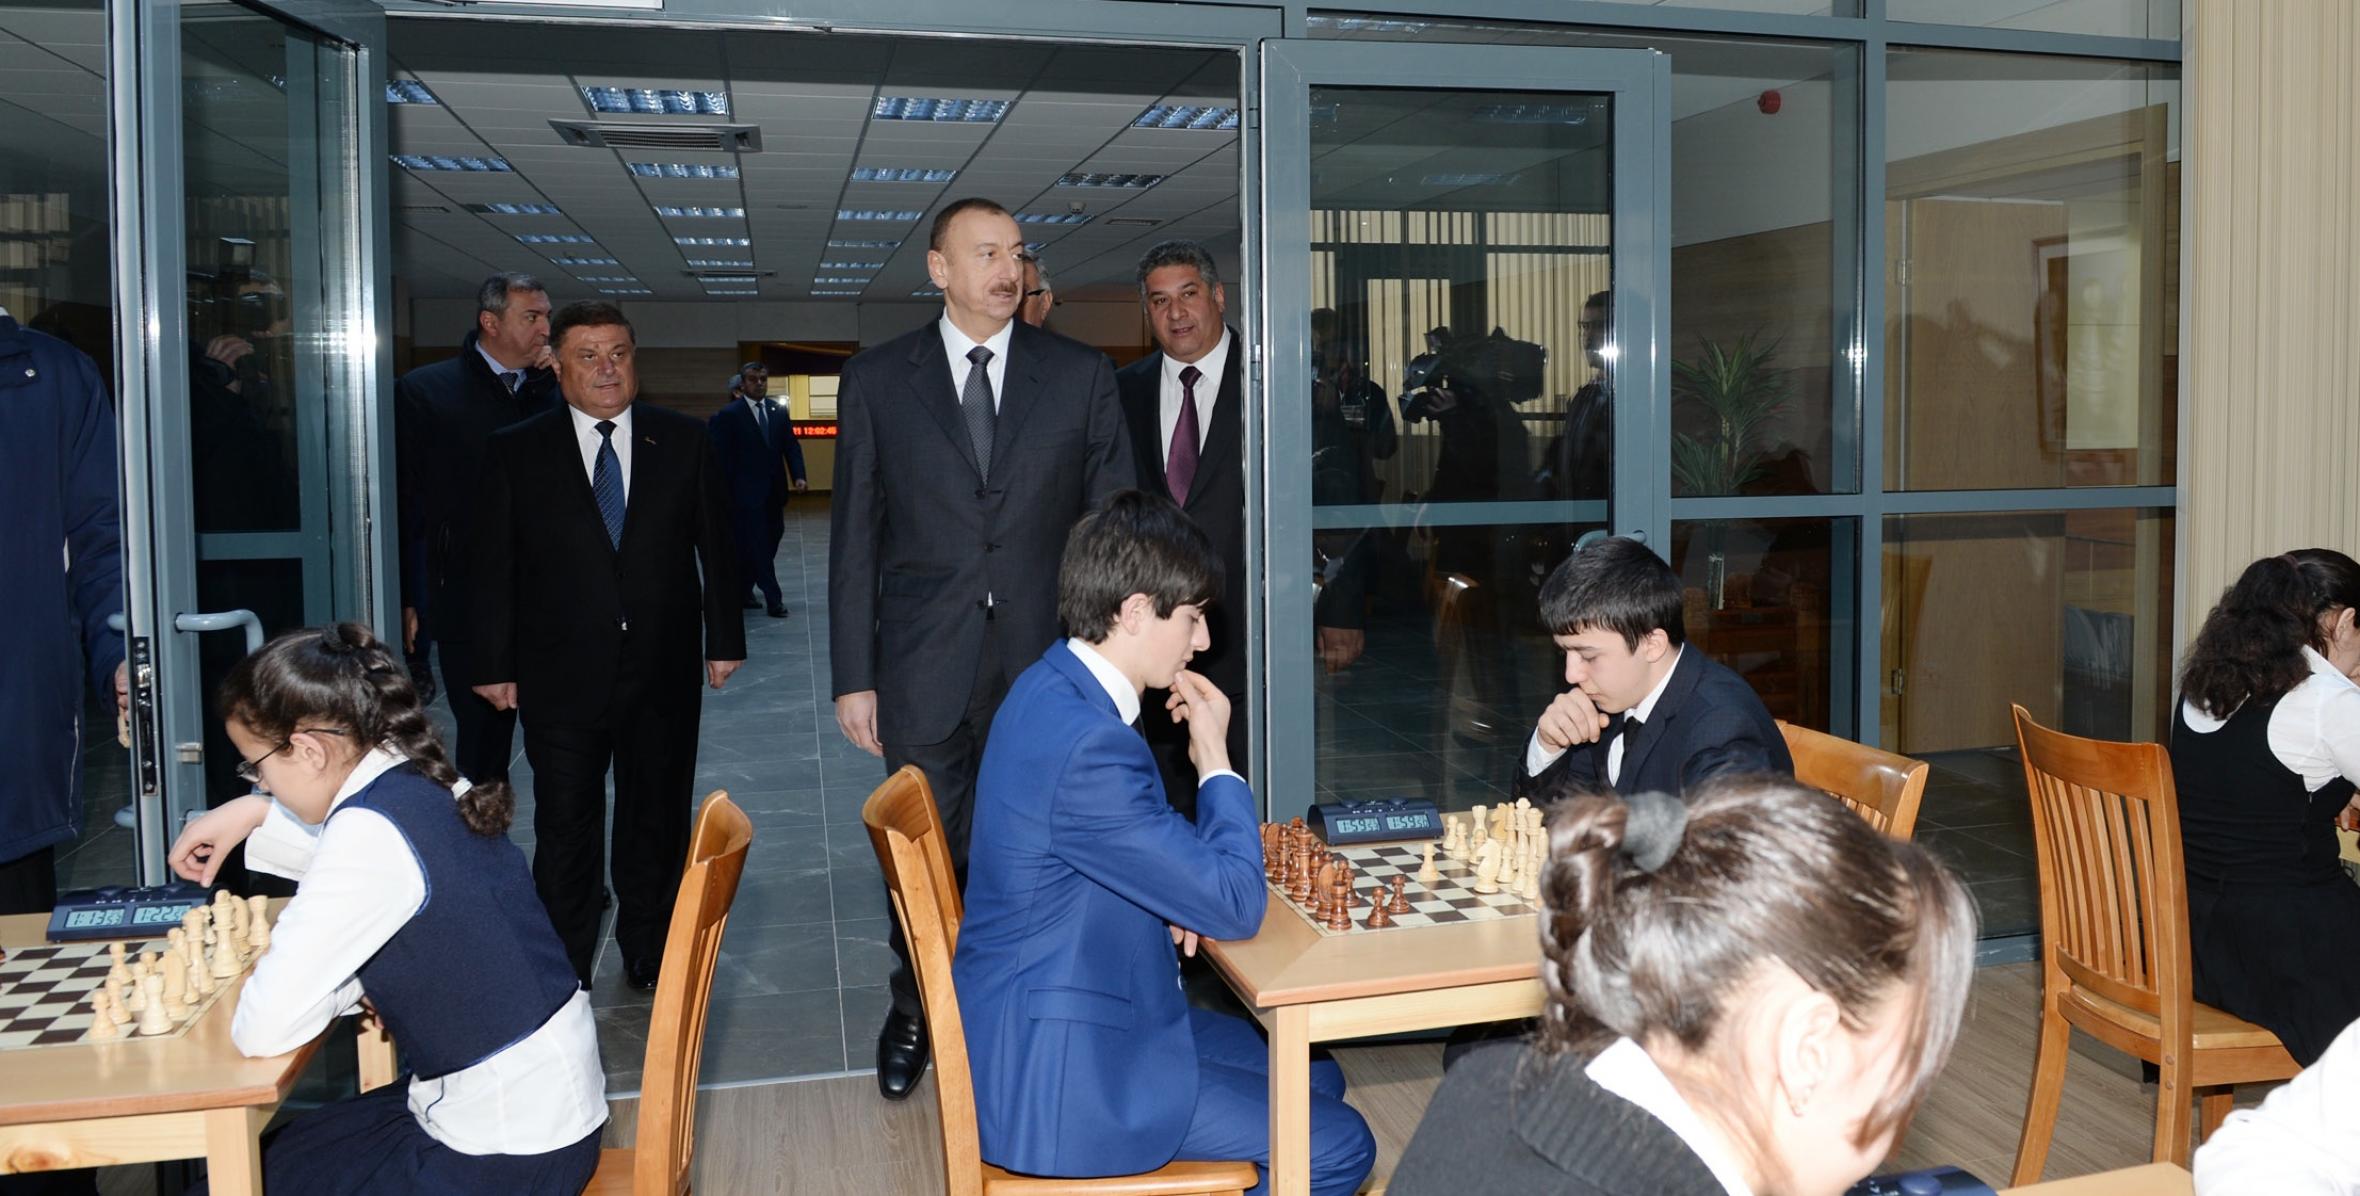 Ilham Aliyev attended the opening of the Goygol Olympic Sports Center